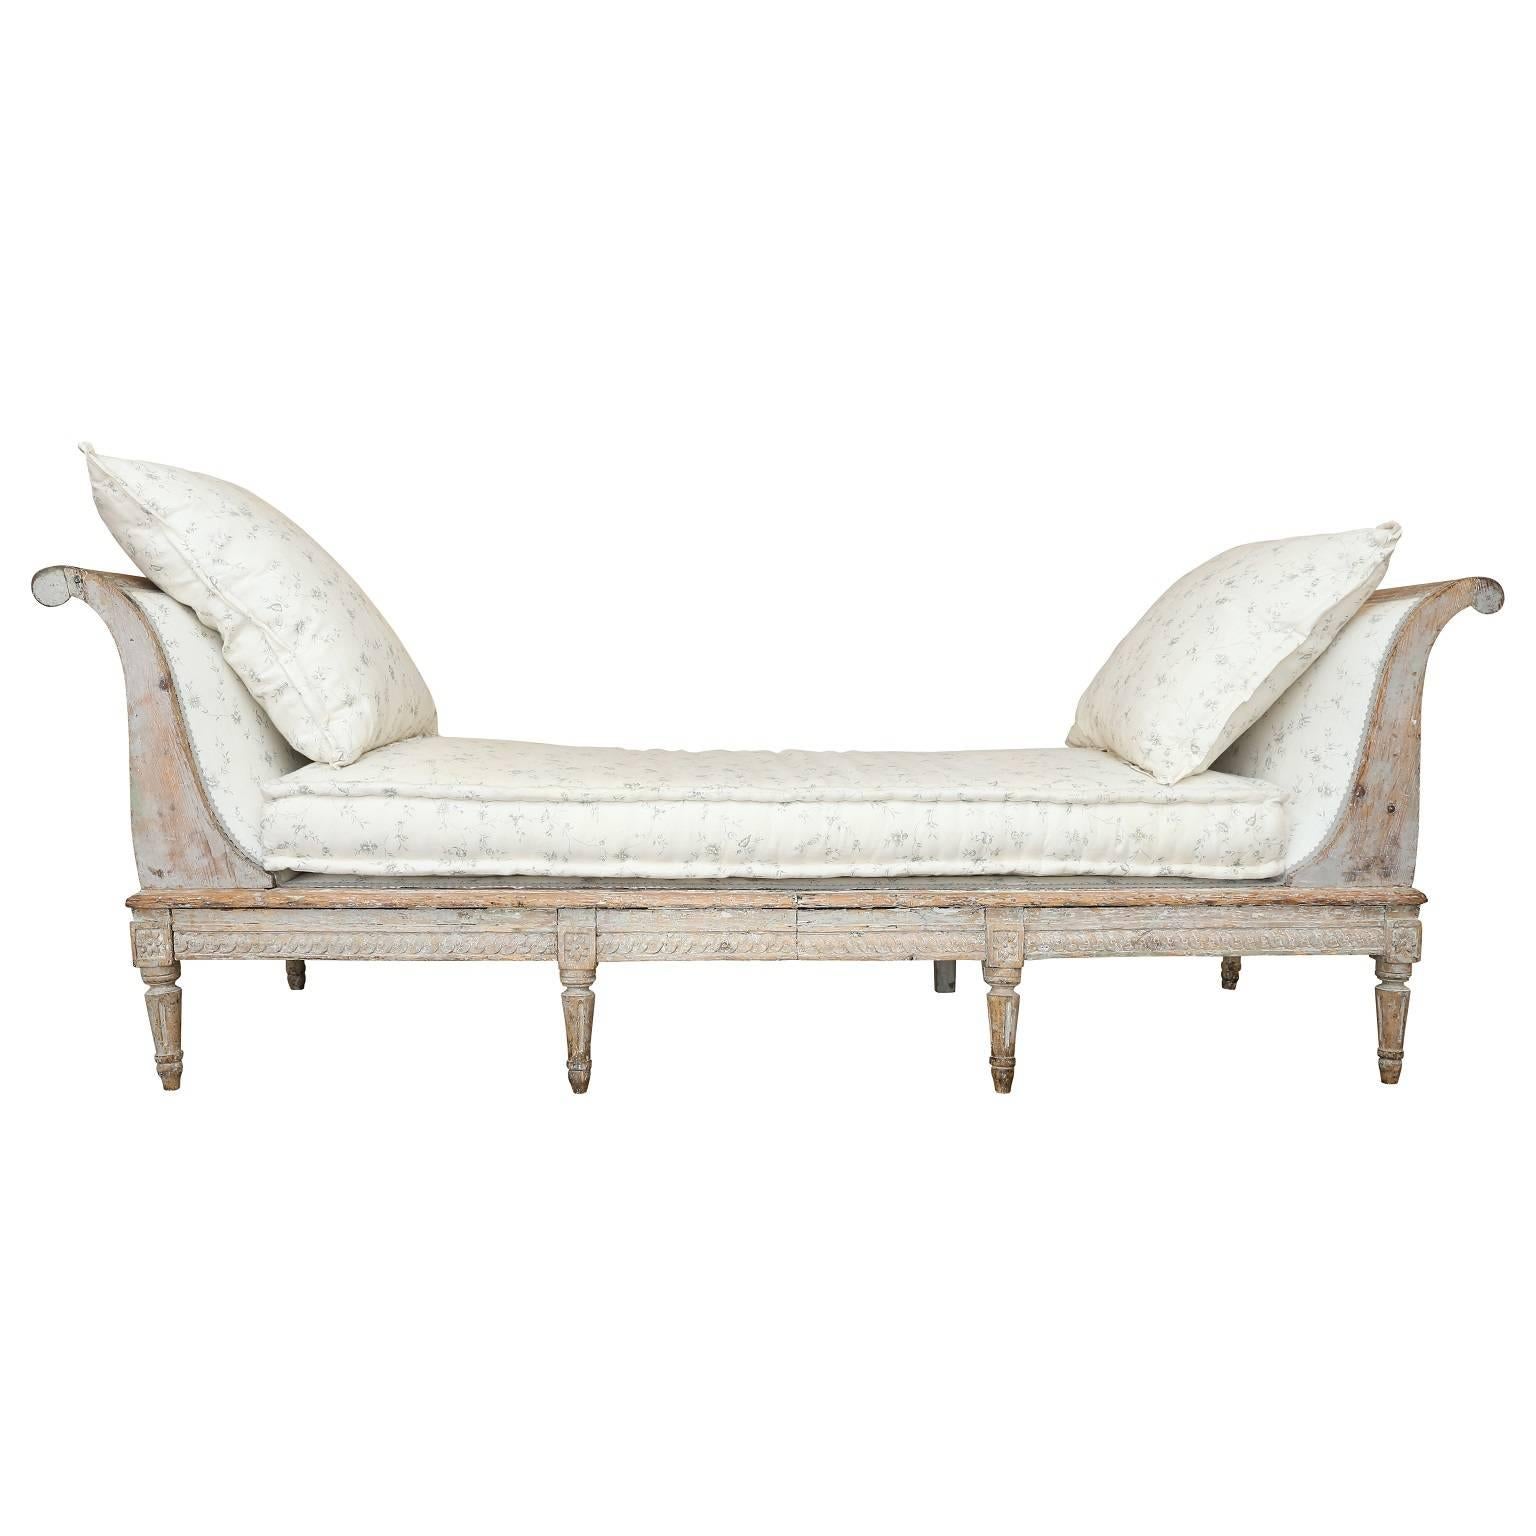 18th century Gustavian daybed, decorated with gracefully curved arms, a carved guilloche motif along the front and side rails, and legs adorned by carved rosettes and fluting.
 